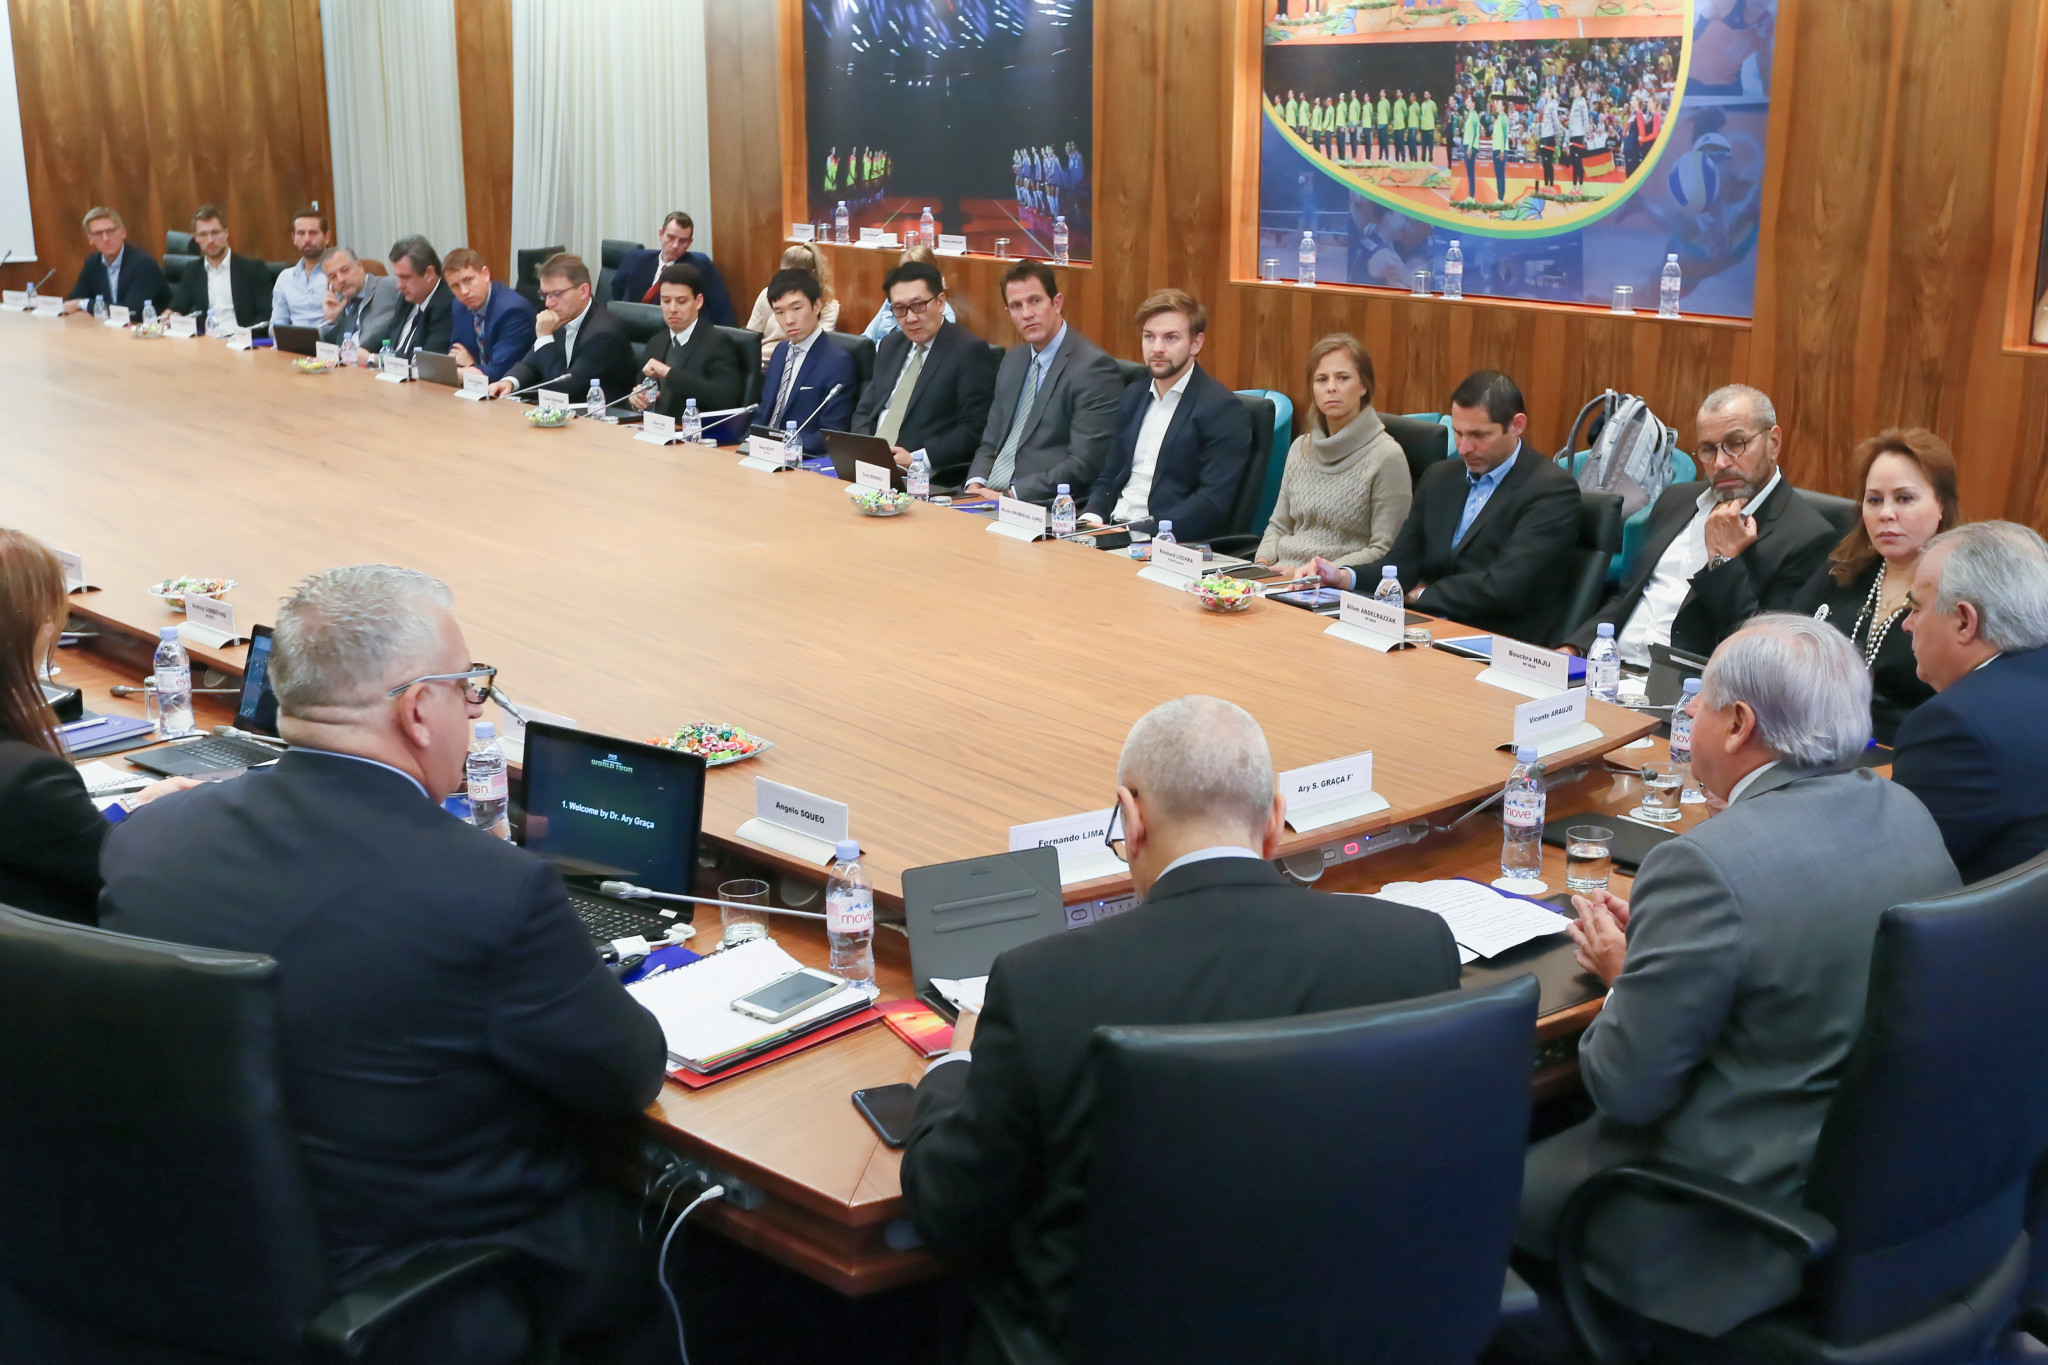 The calendar for the new beach volleybal season was announced following an FIVB World Tour Council meeting ©FIVB